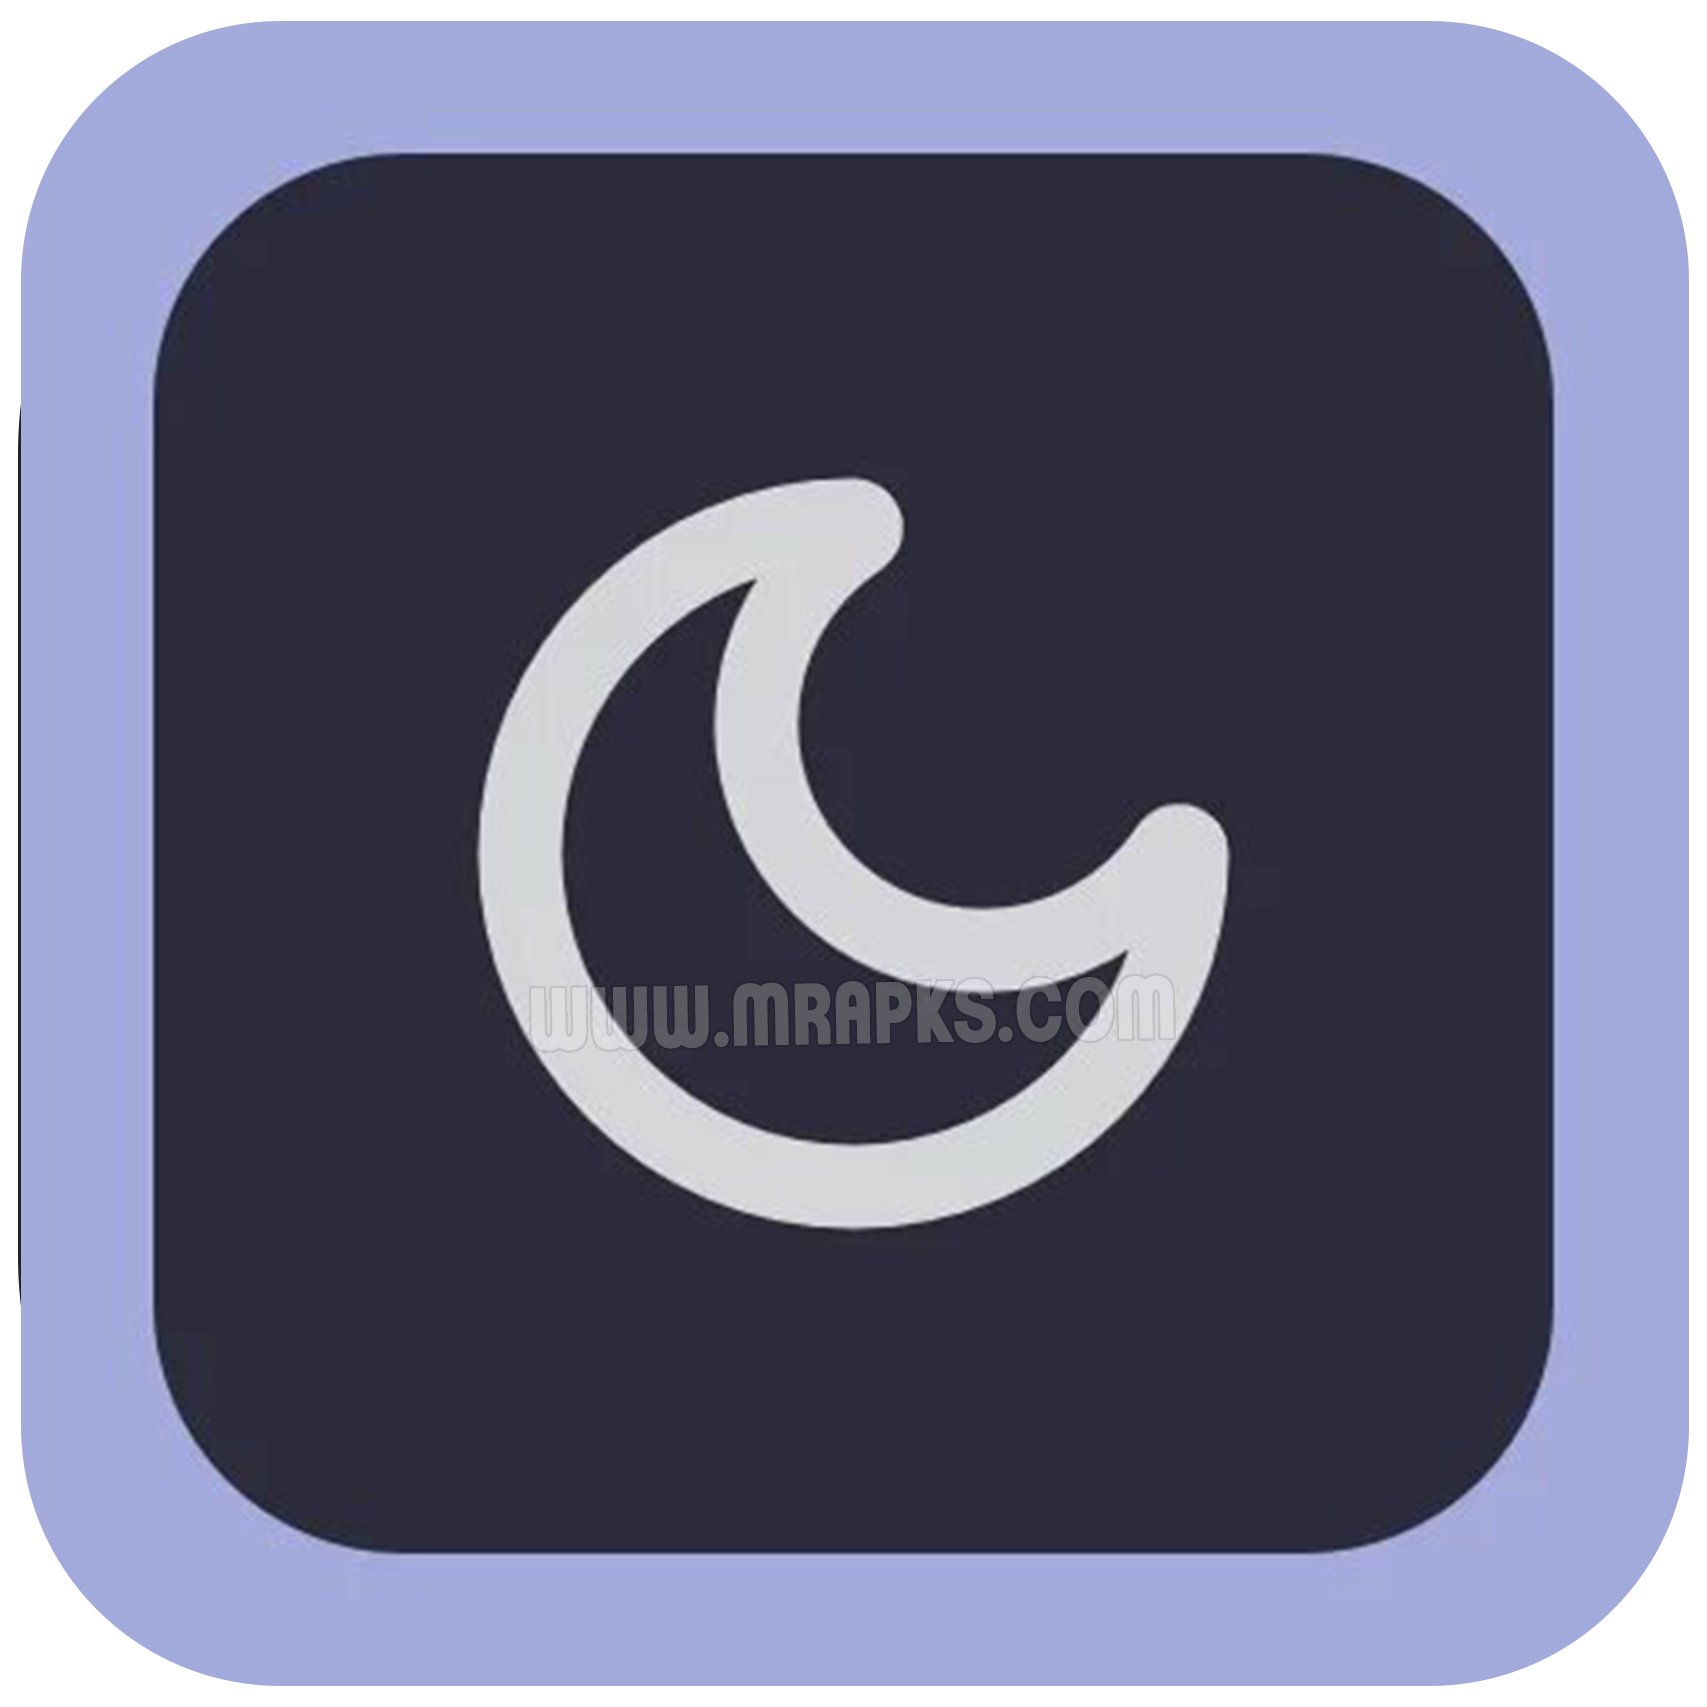 Ethereal for Substratum v35.13.2.1 (Patched) APK